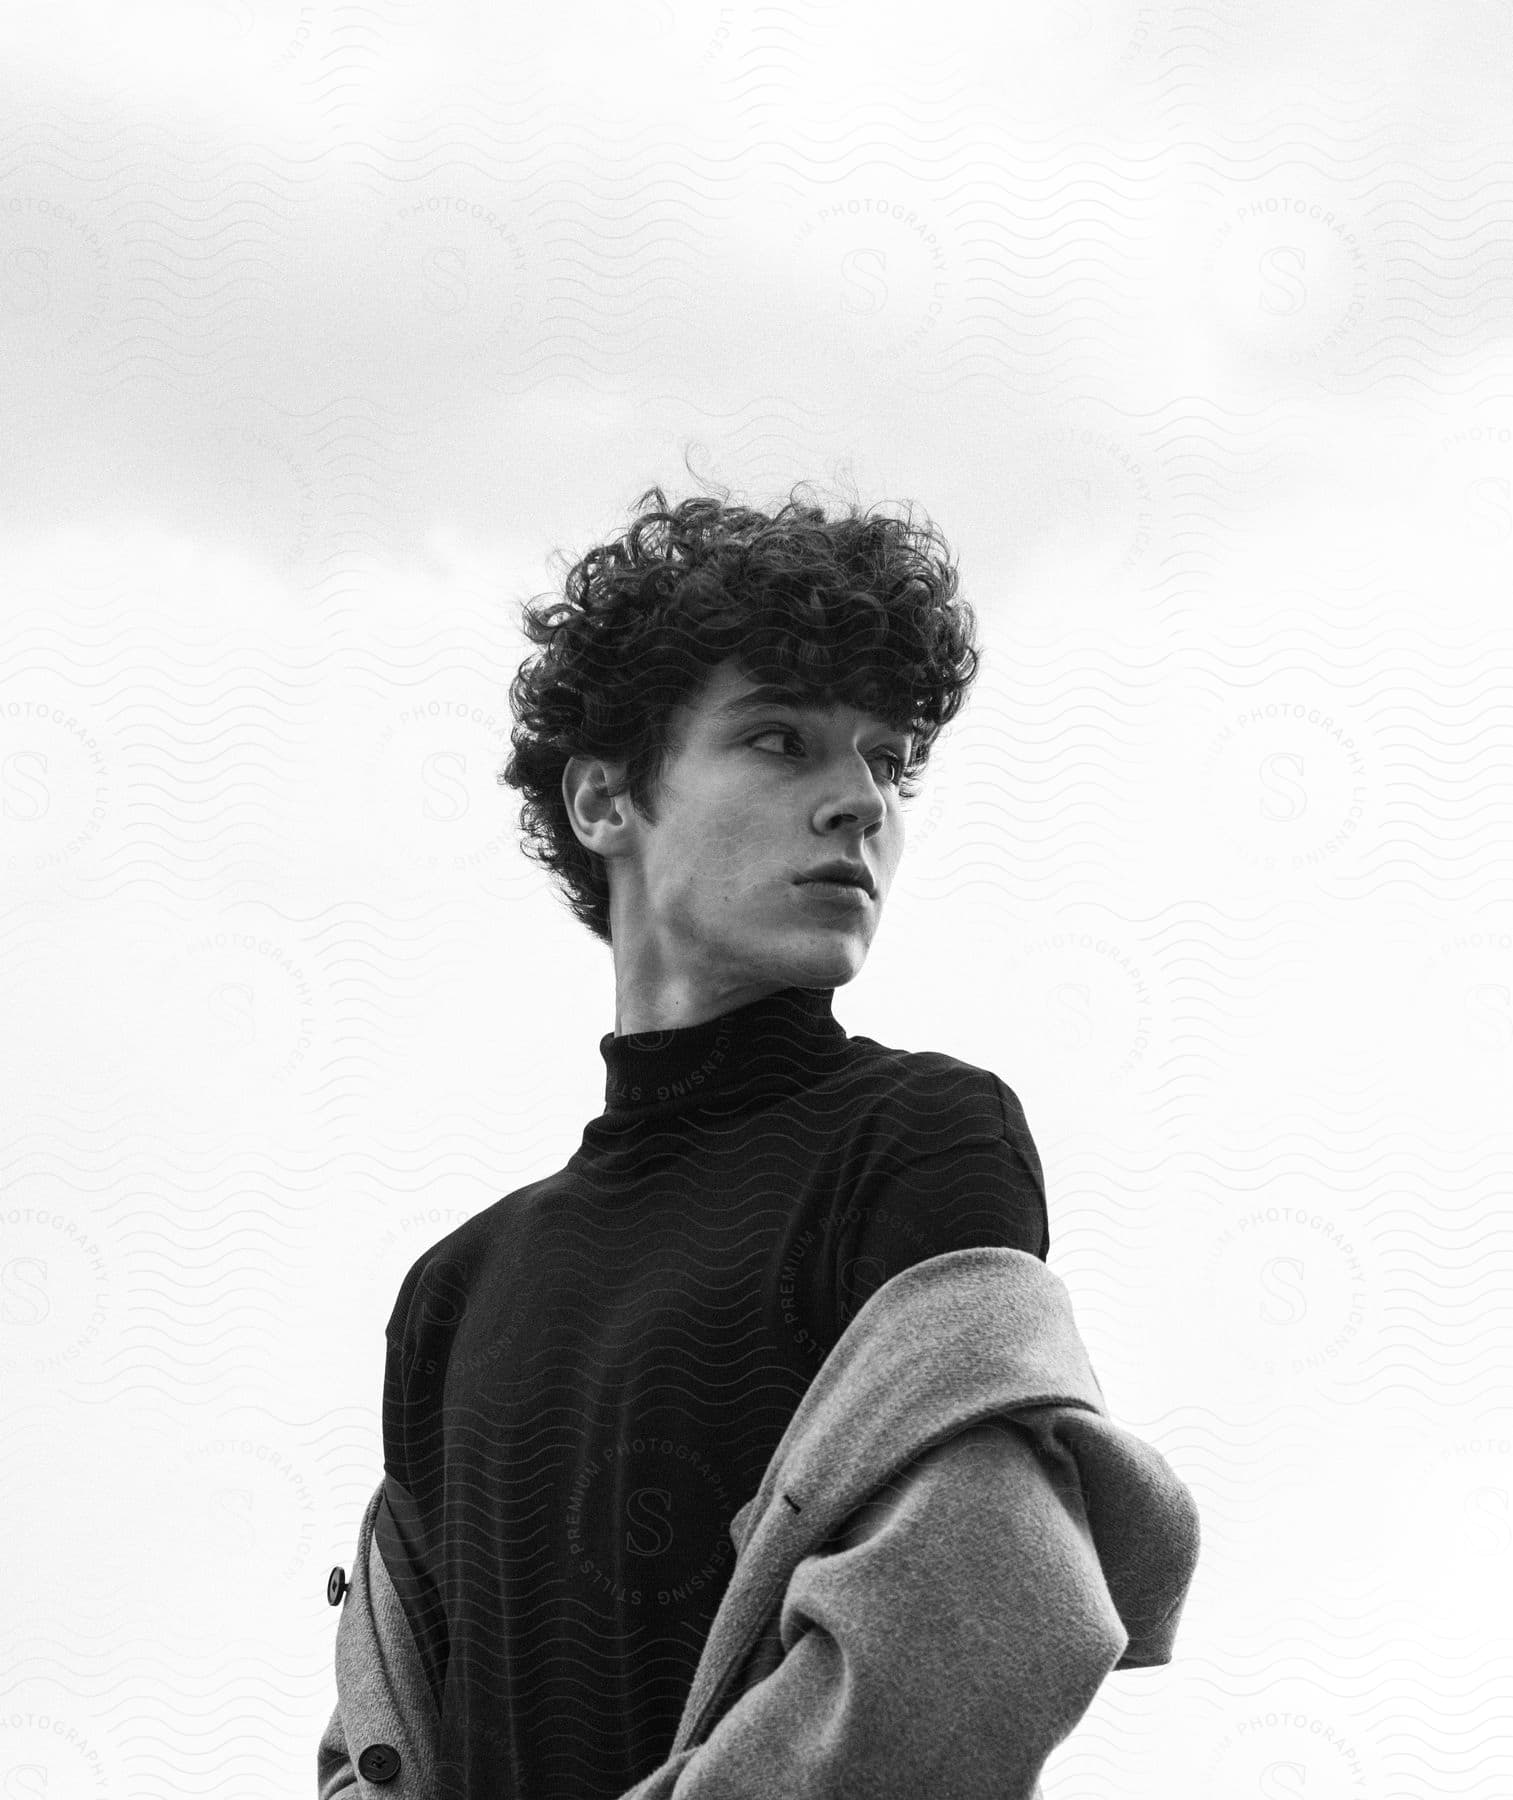 Teenage boy with curly hair wearing a black turtleneck sweater and gray coat looking over his shoulder